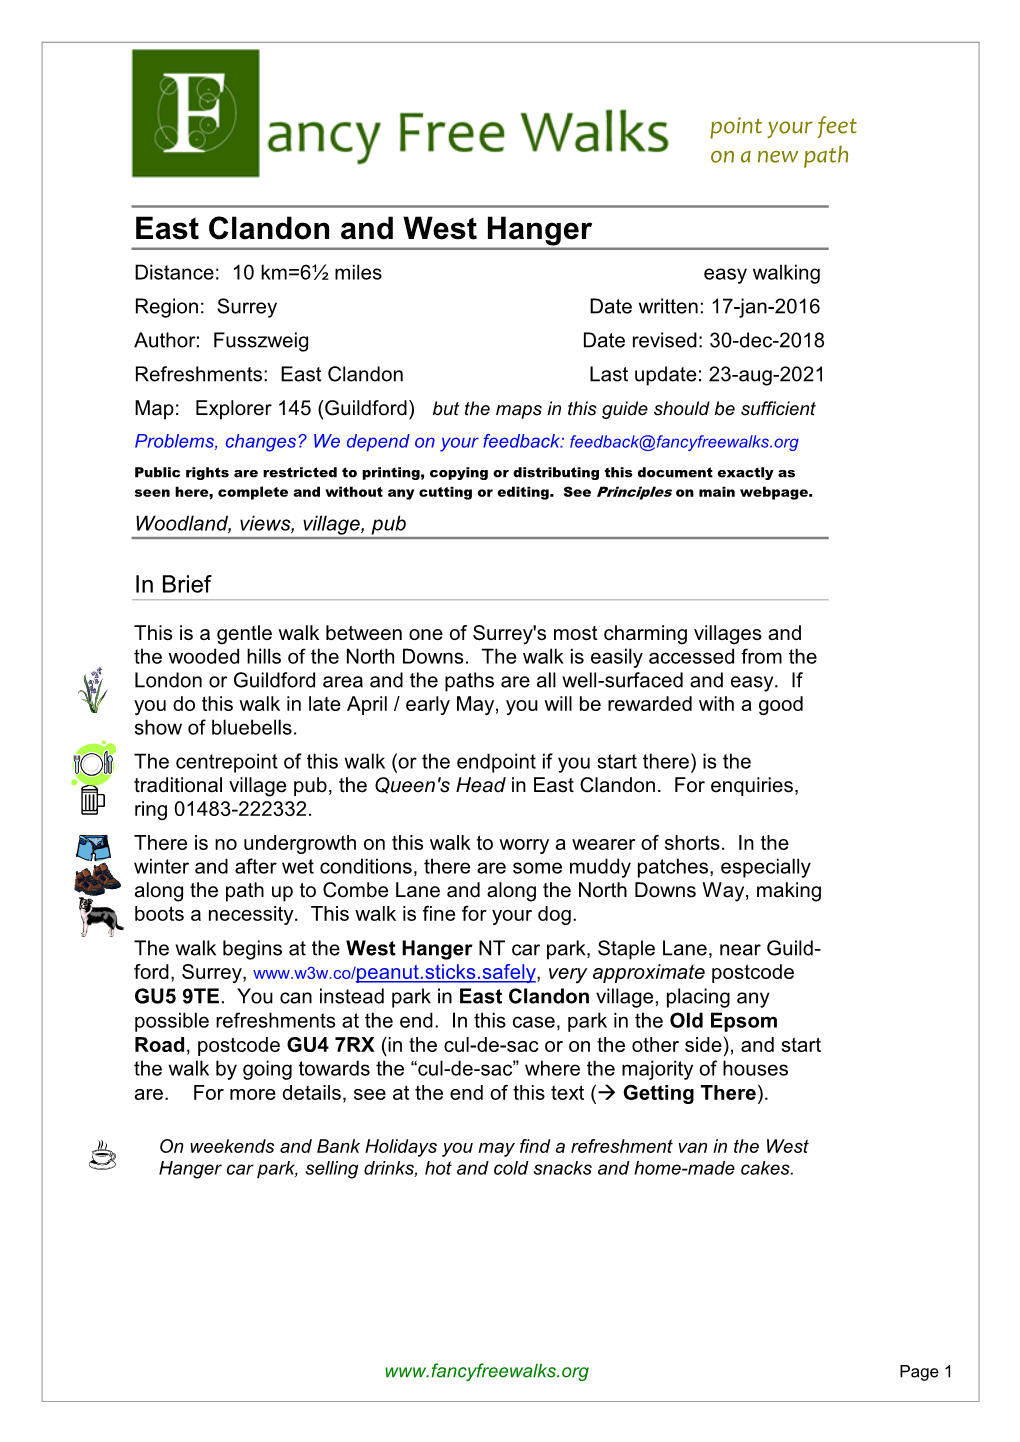 East Clandon and West Hanger